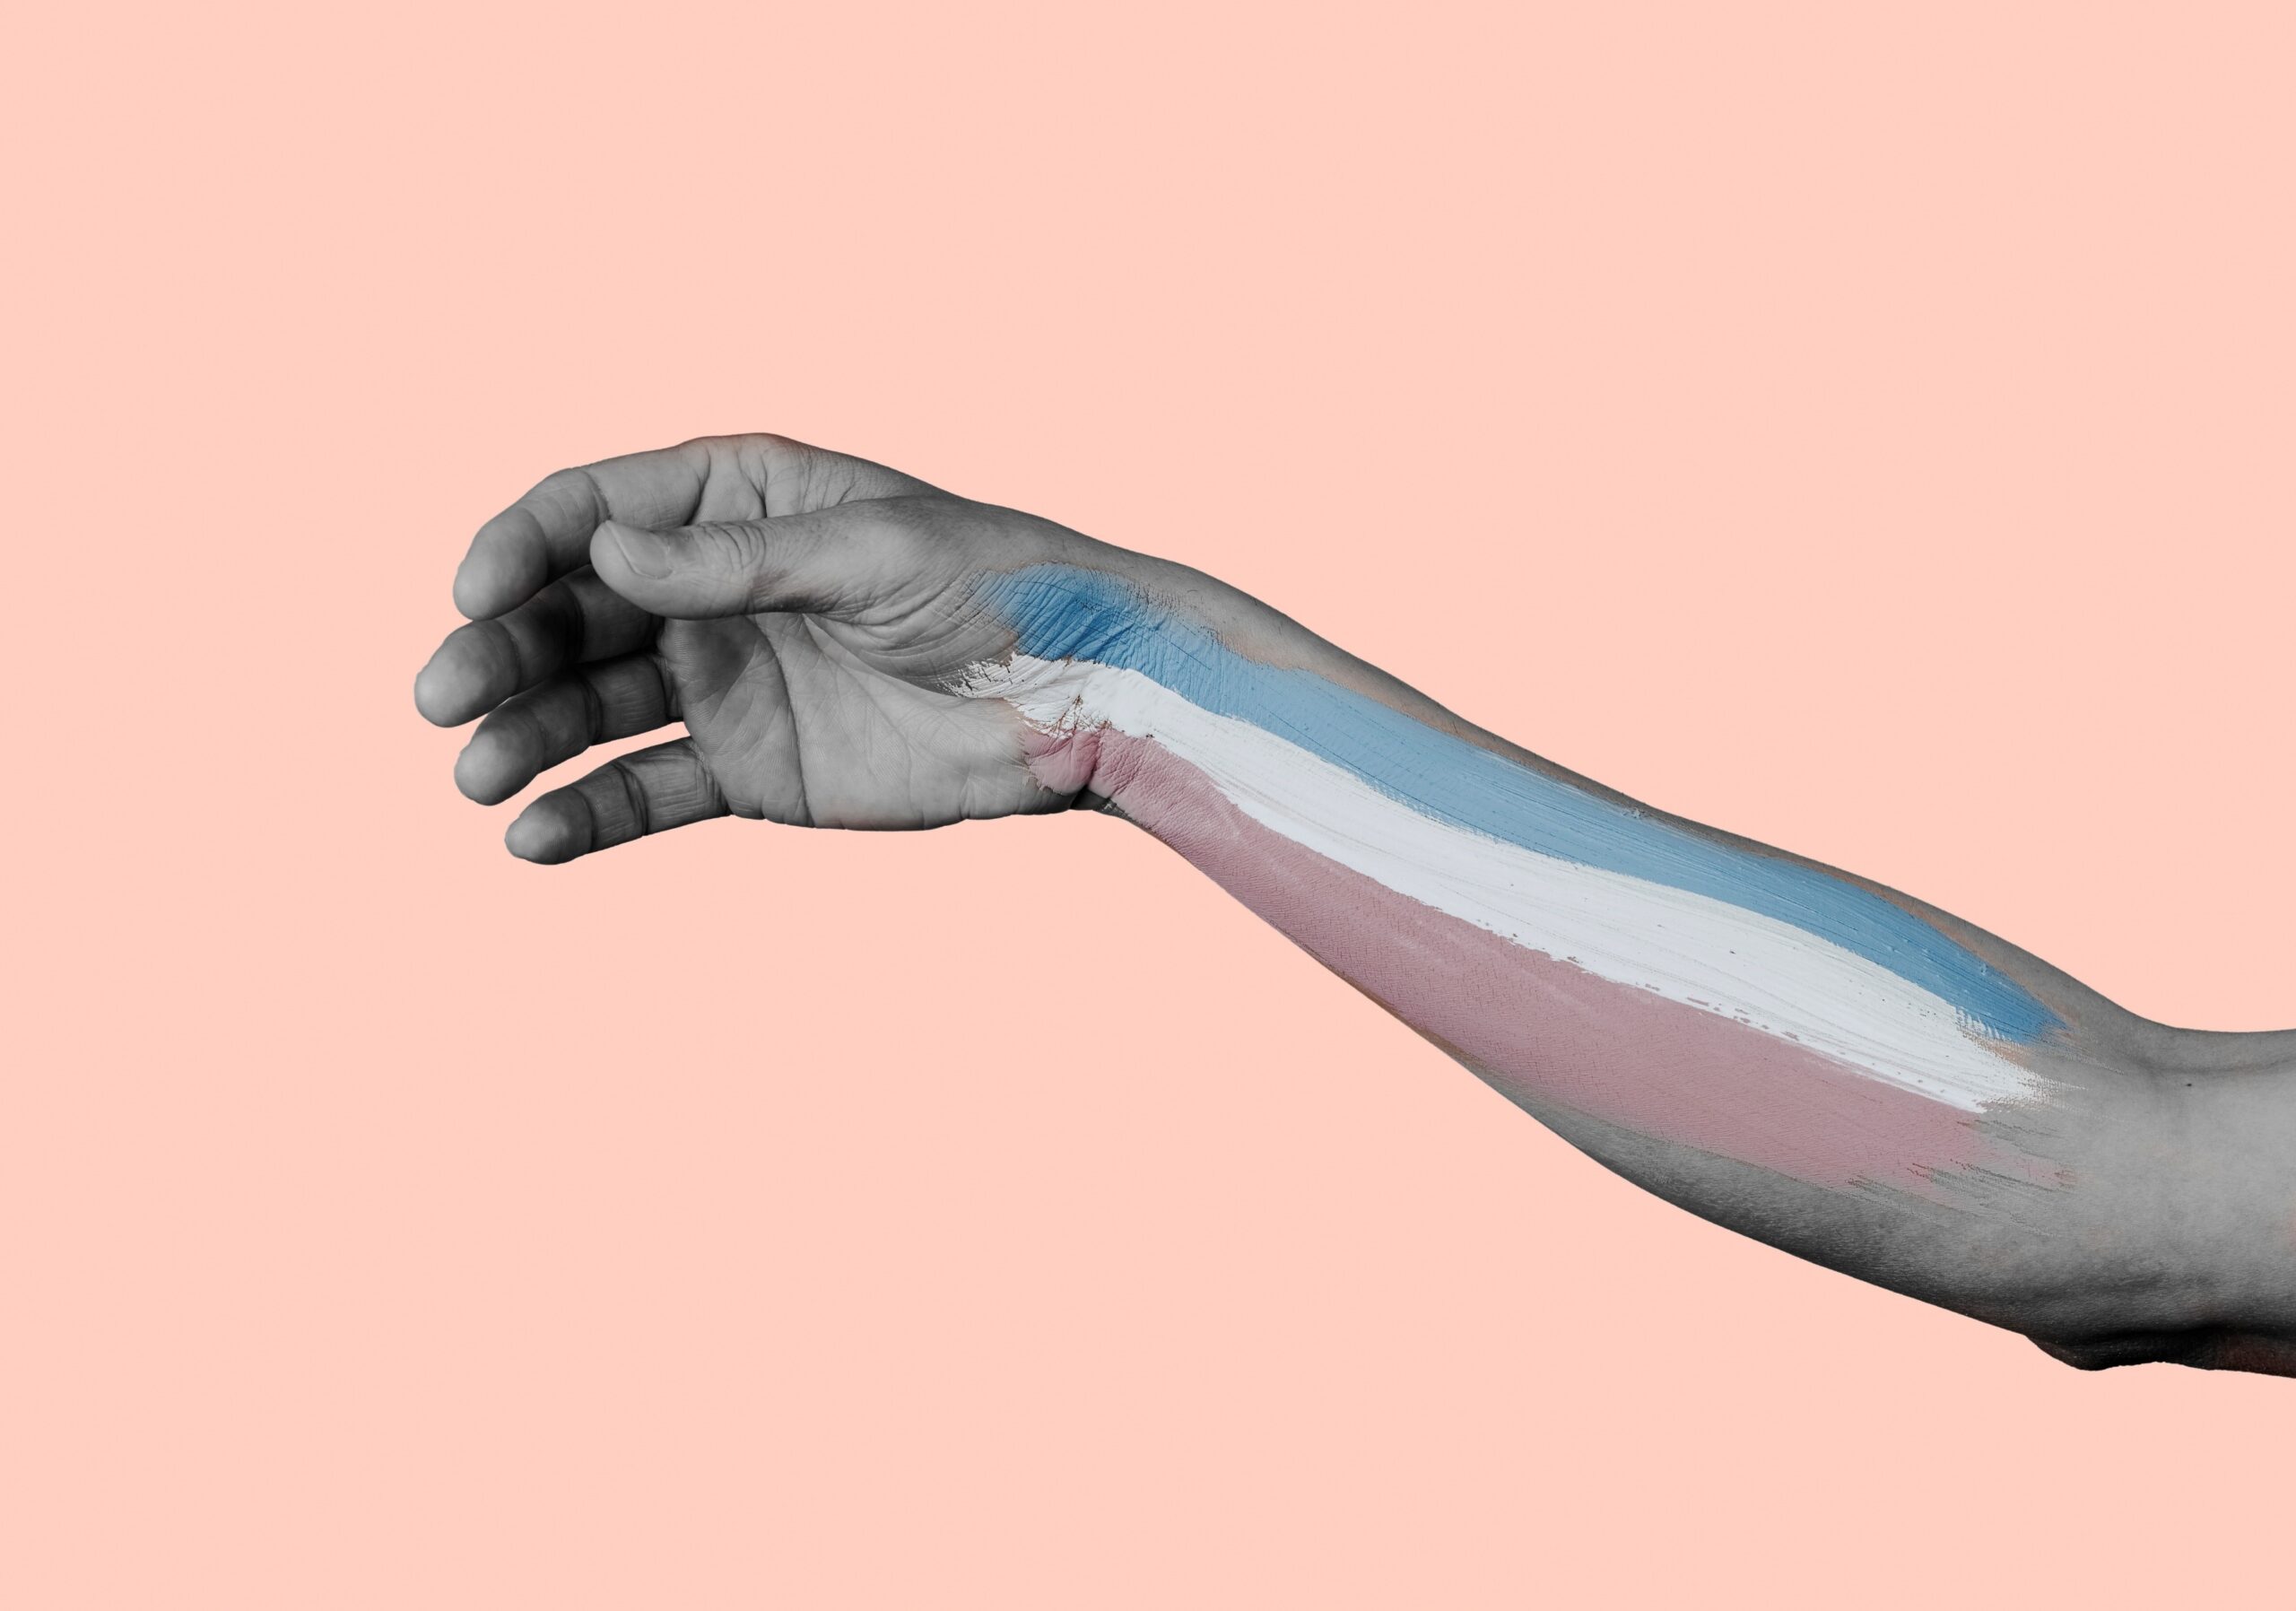 A greyscale arm on a baby pink background. The arm has the trans flag painted on it from wrist to elbow.